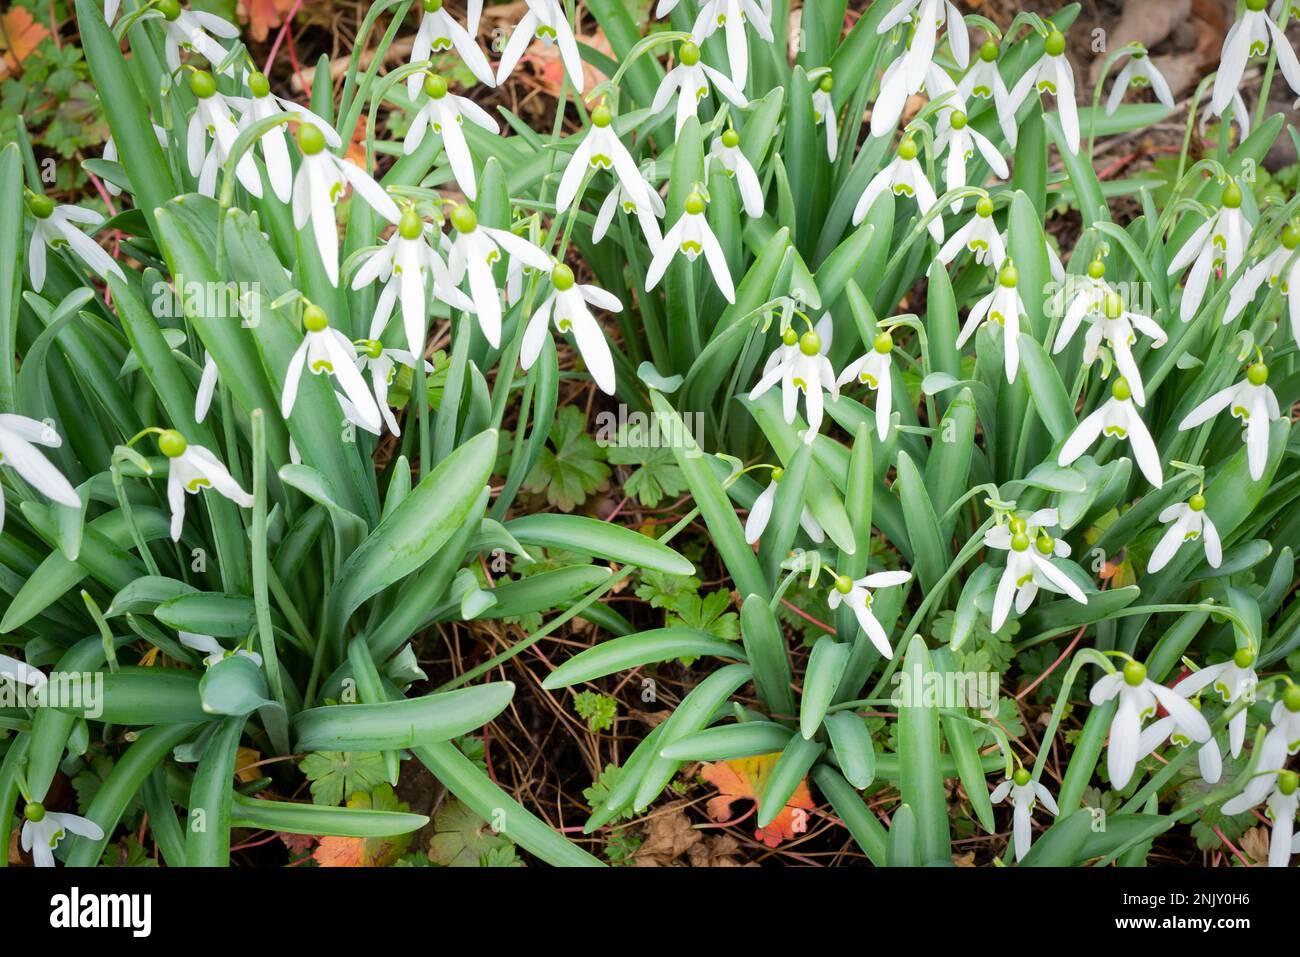 A colony of wild snowdrops seen in full bloom during early spring. Stock Photo